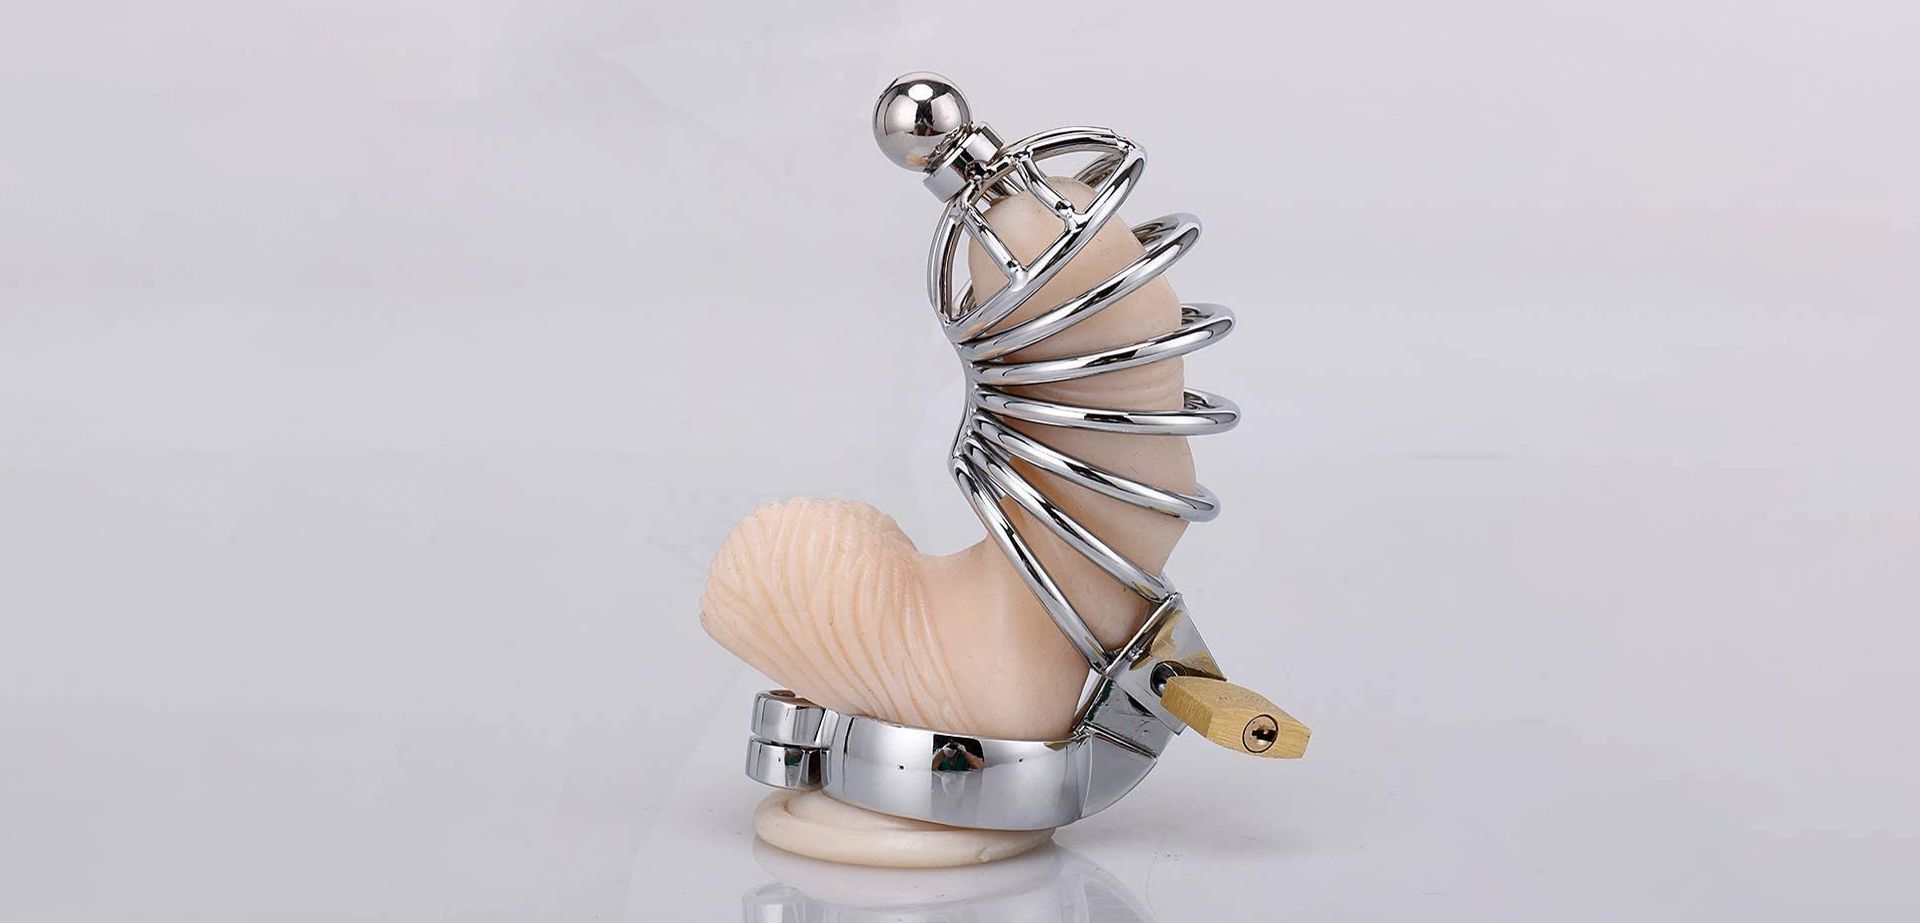 Example how to put on a chastity cage.